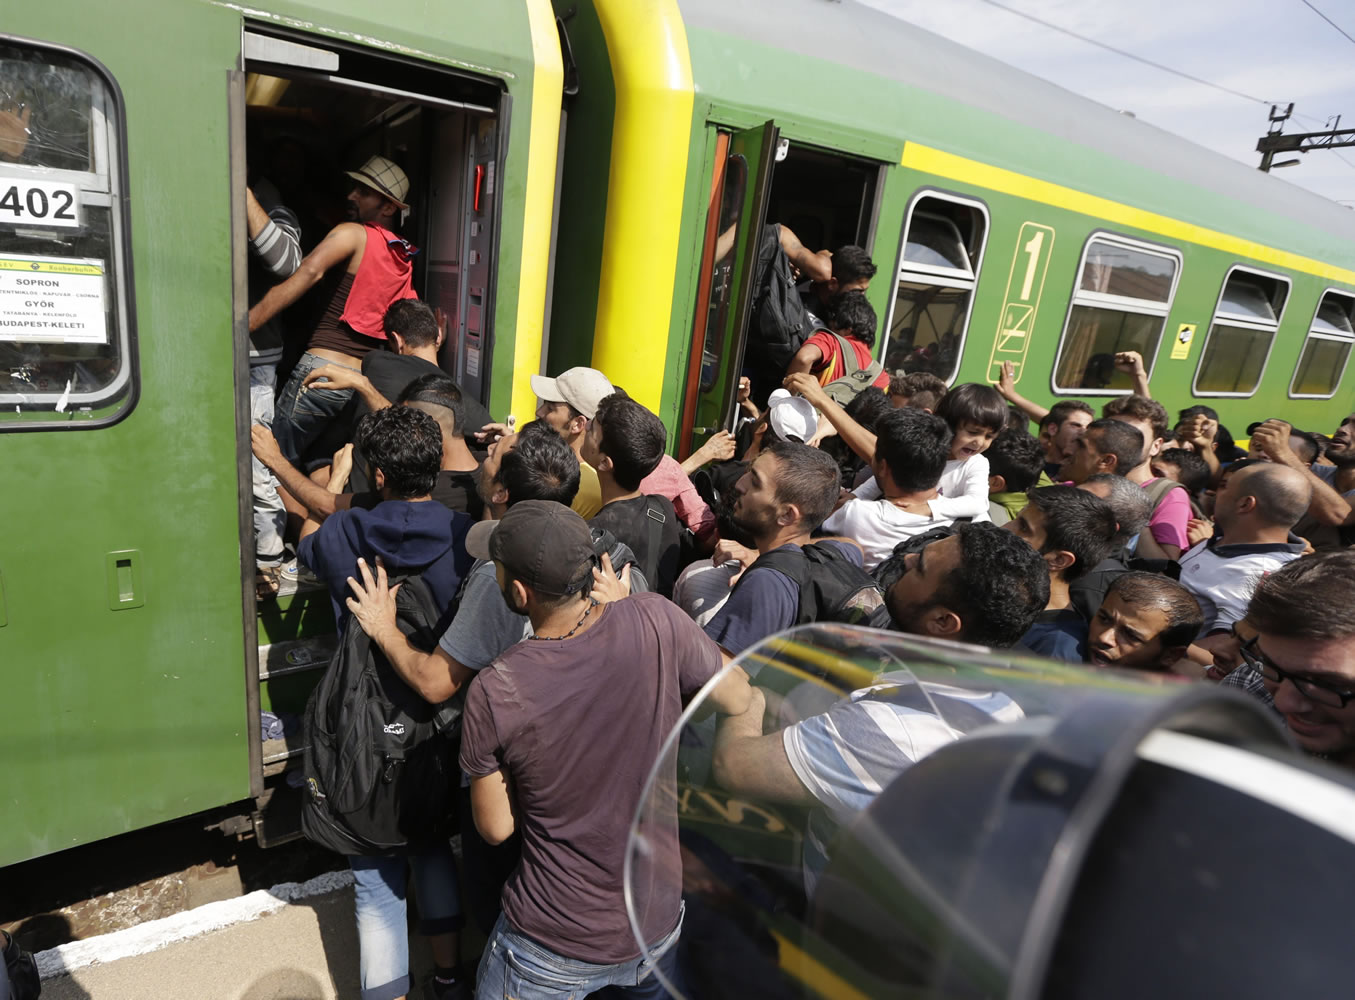 Migrants get back on a train in Bicske, Hungary, Thursday, Sept. 3, 2015. Over 150,000 migrants have reached Hungary this year, most coming through the southern border with Serbia. Many apply for asylum but quickly try to leave for richer EU countries.